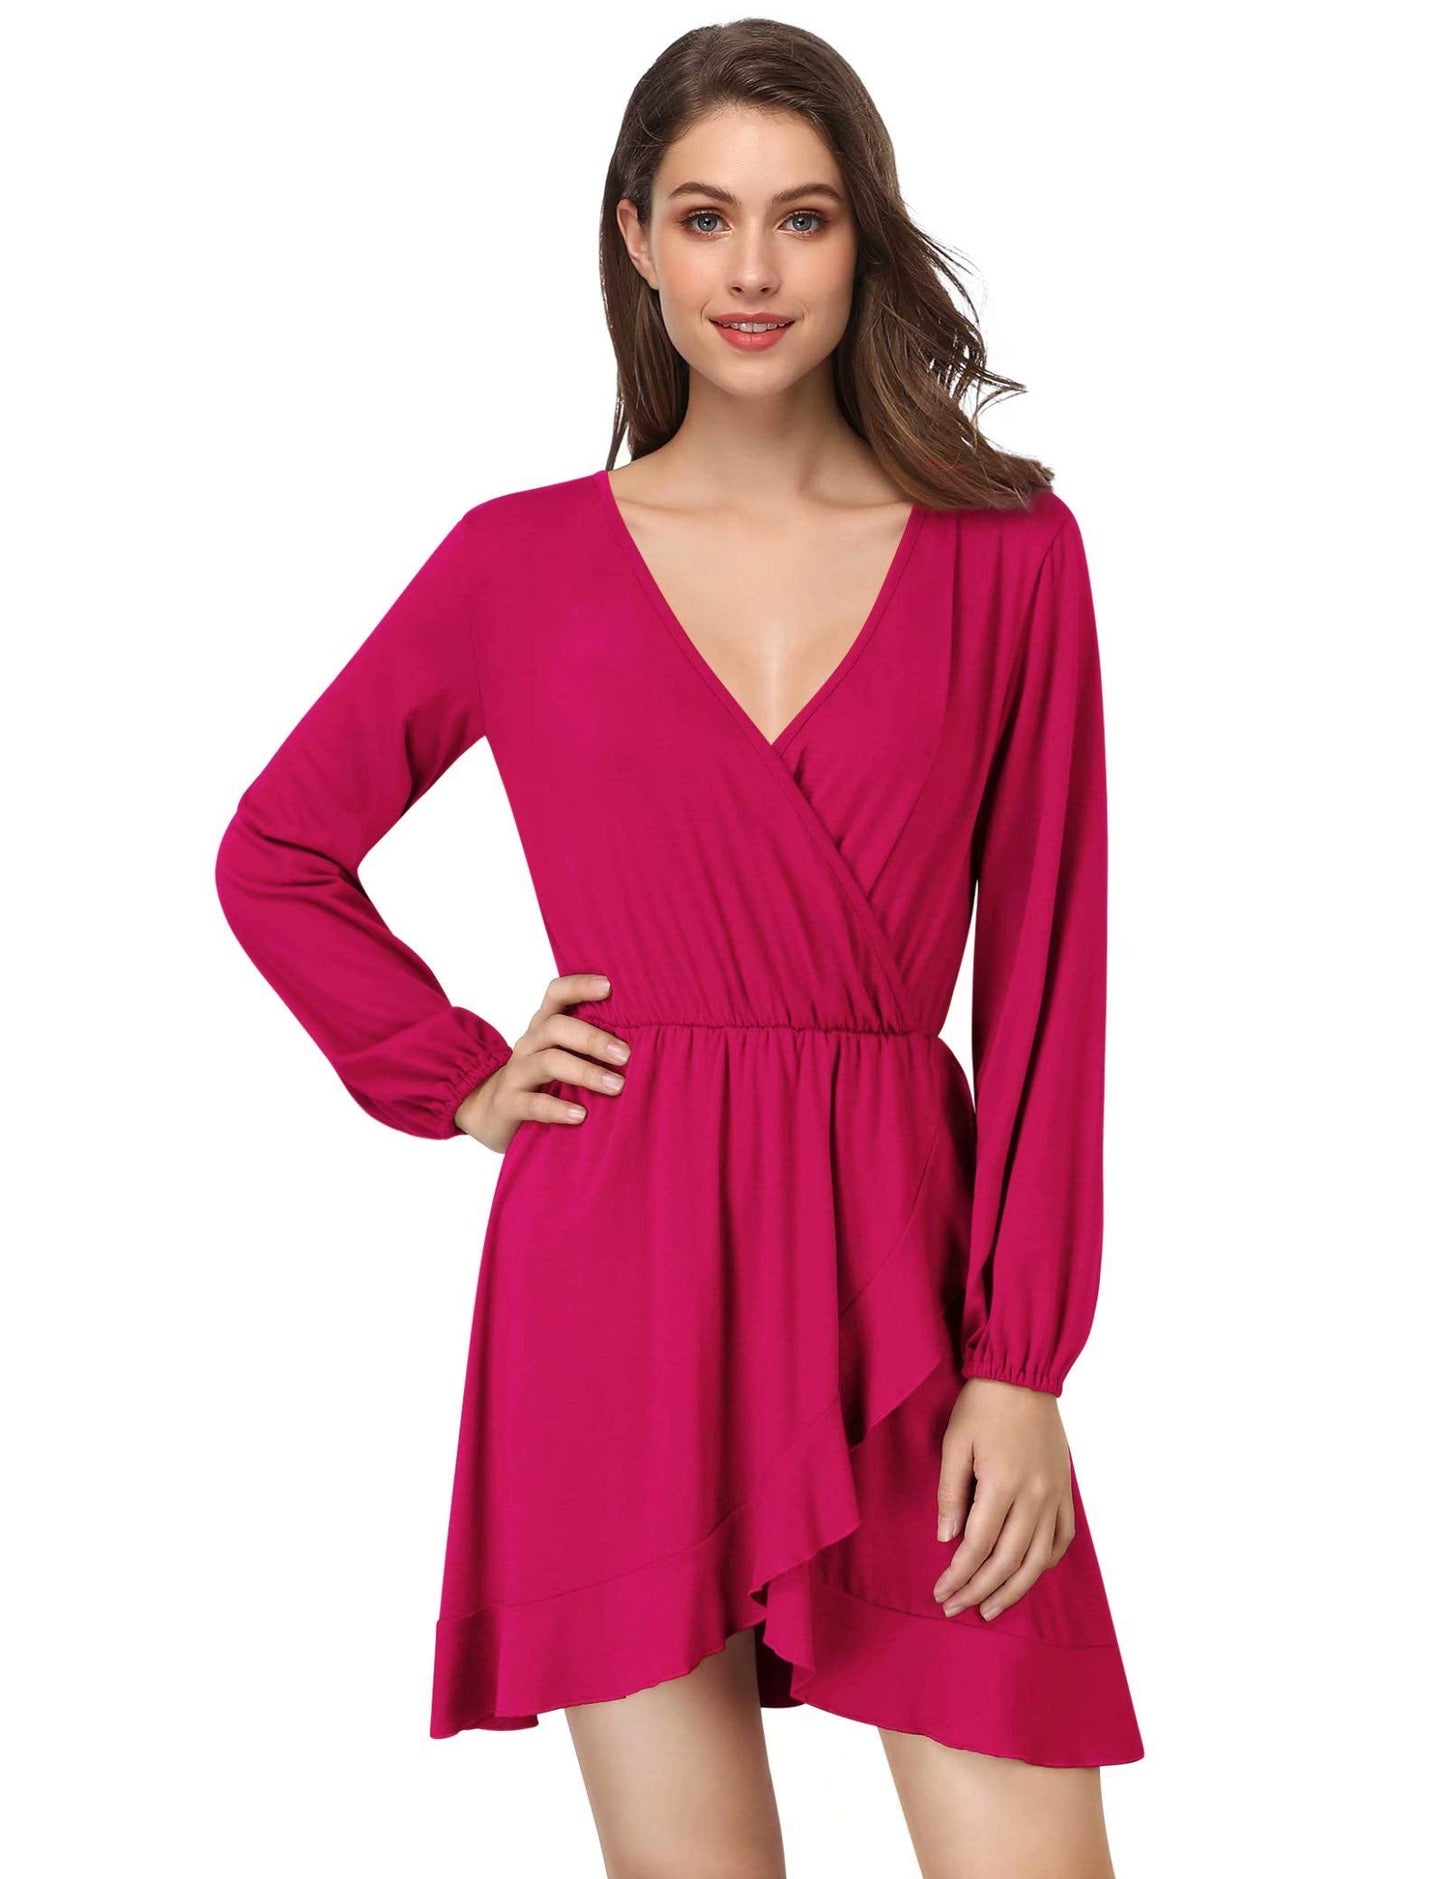 YESFASHION Women's Vneck A-Line Ruffles Cocktail Party Dress Wine Red